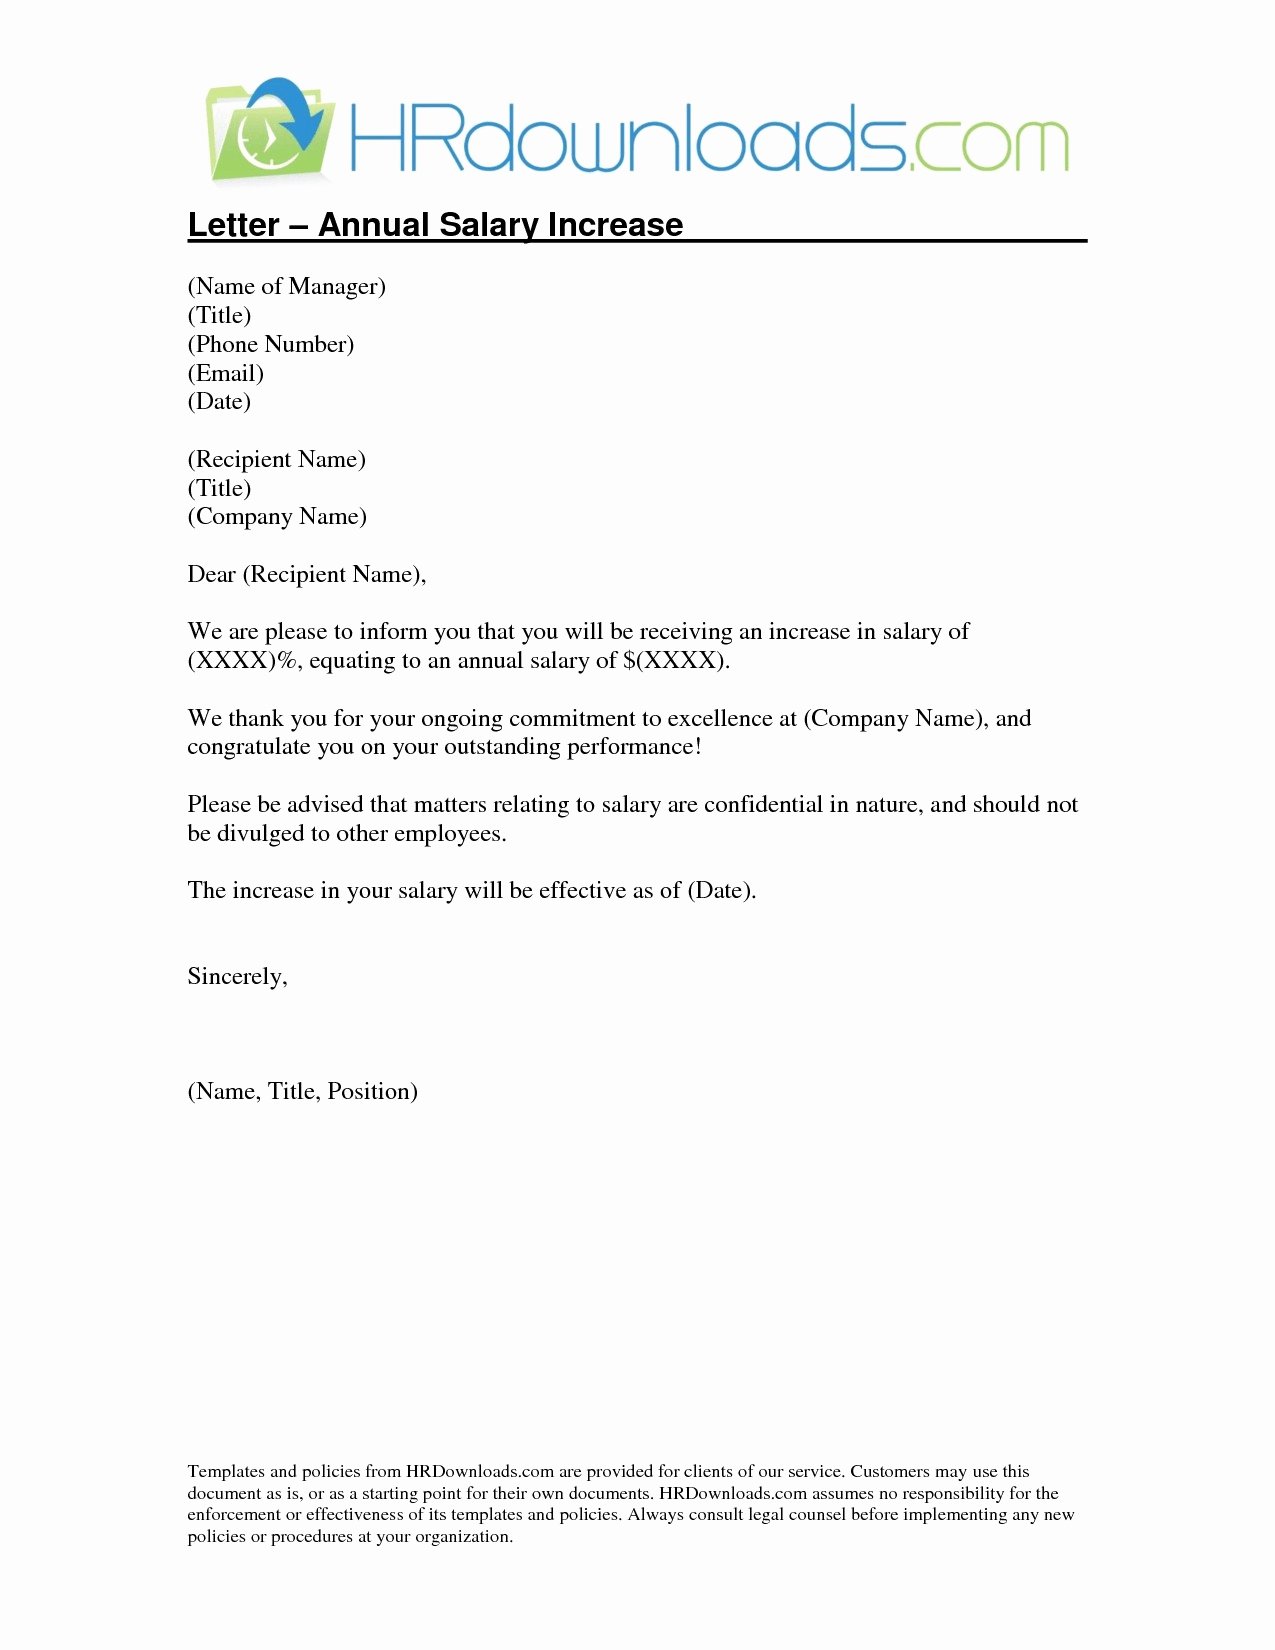 Salary Increase Letter Template Awesome Salary Increase Letter to Employees